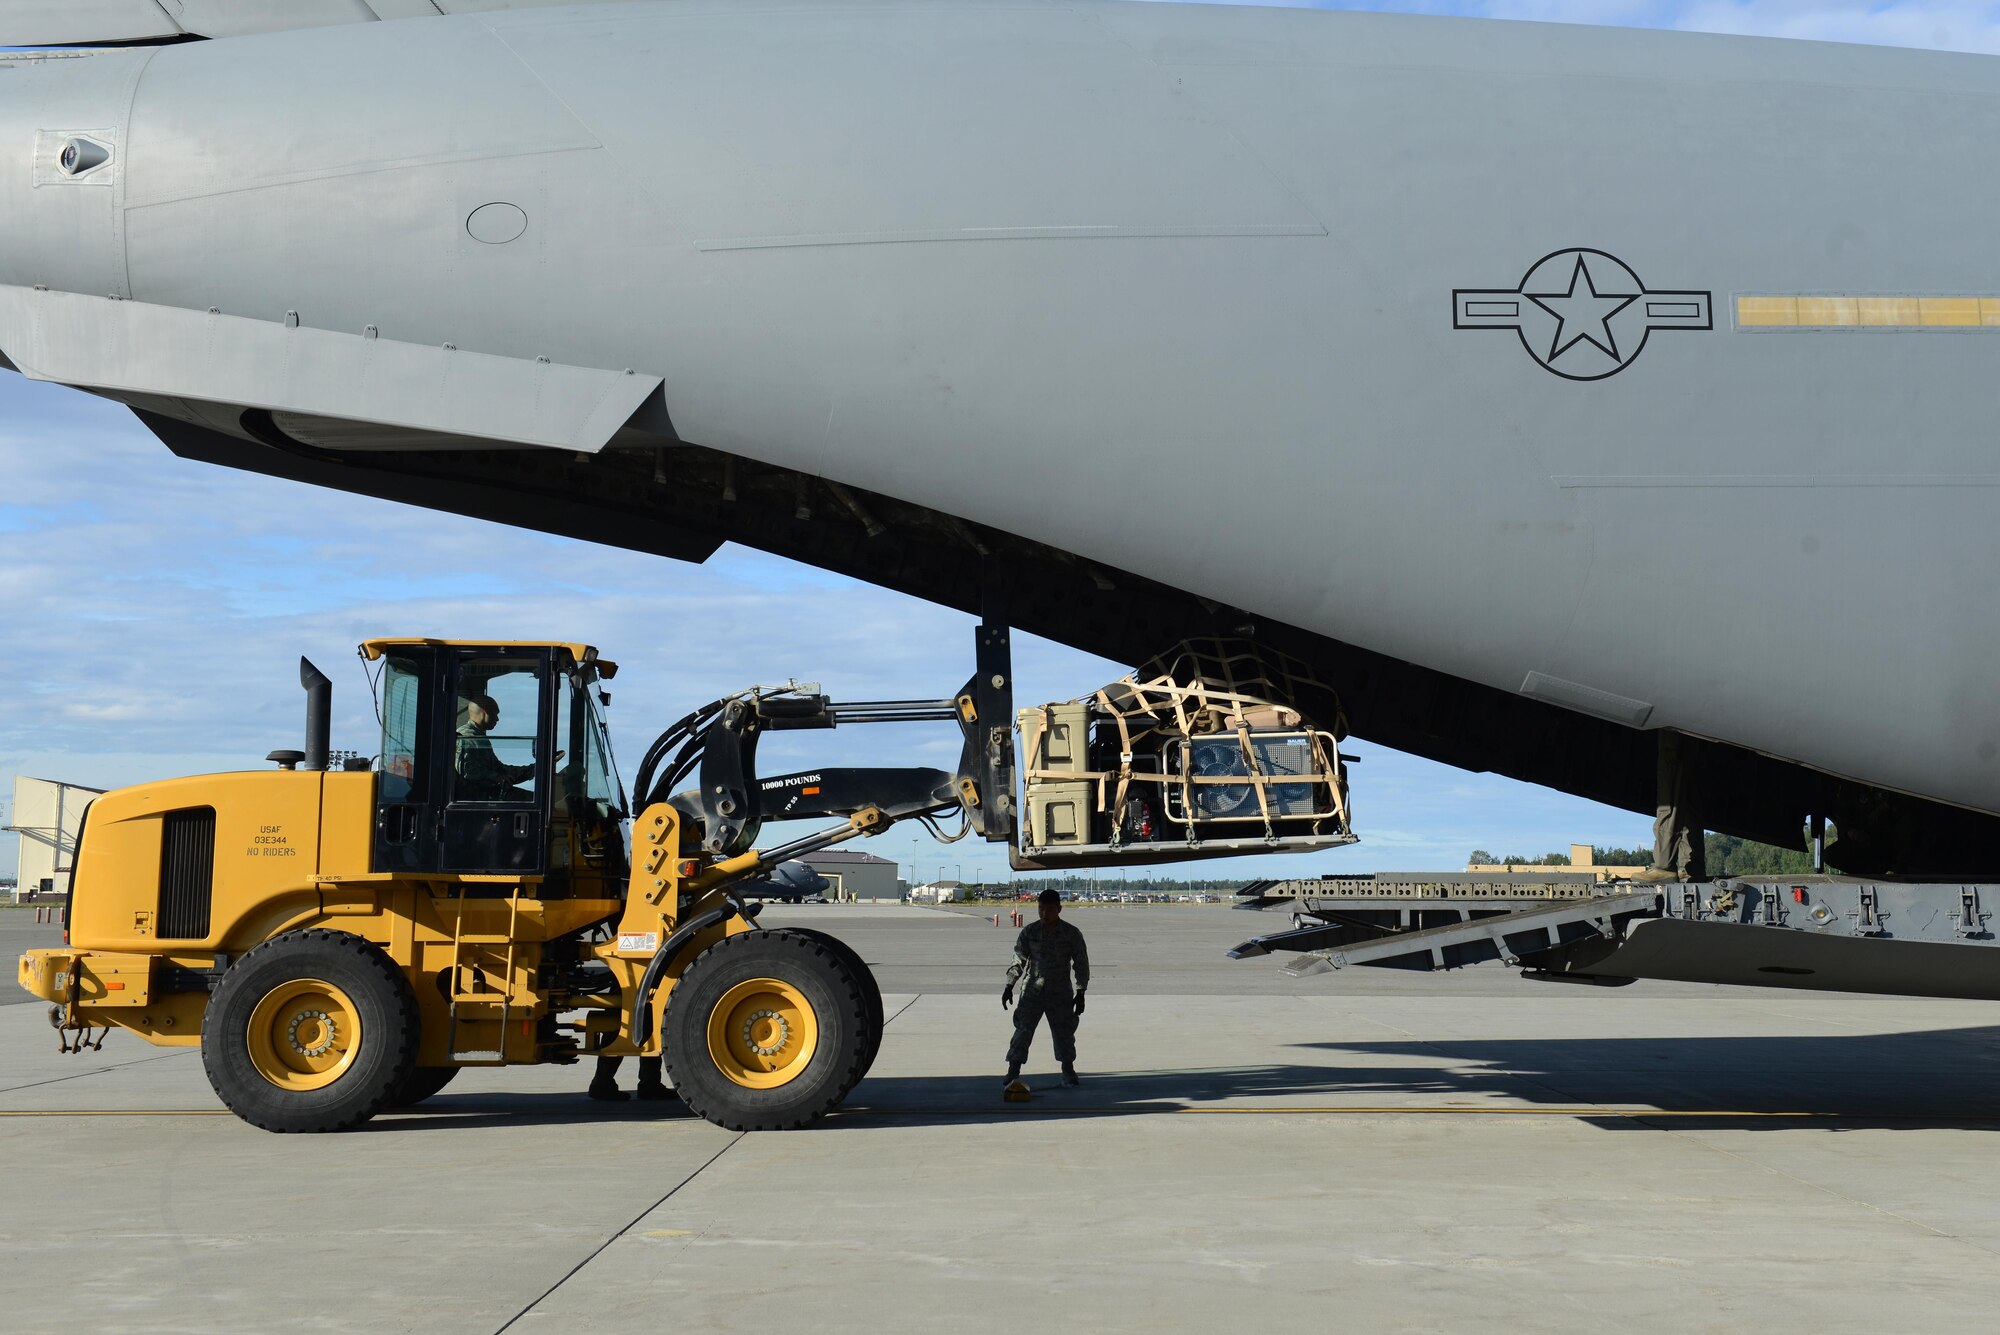 Airmen load cargo on a C-17 Globemaster III, at Joint Base Elmendorf-Richardson, Alaska, Aug. 28, 2017, preparing to leave for Texas to provide humanitarian support after Hurricane Harvey. The Air National Guard 176th Wing sent personnel from the 212th Rescue Squadron to provide search-and-rescue, and support aeromedical evacuation and humanitarian relief.